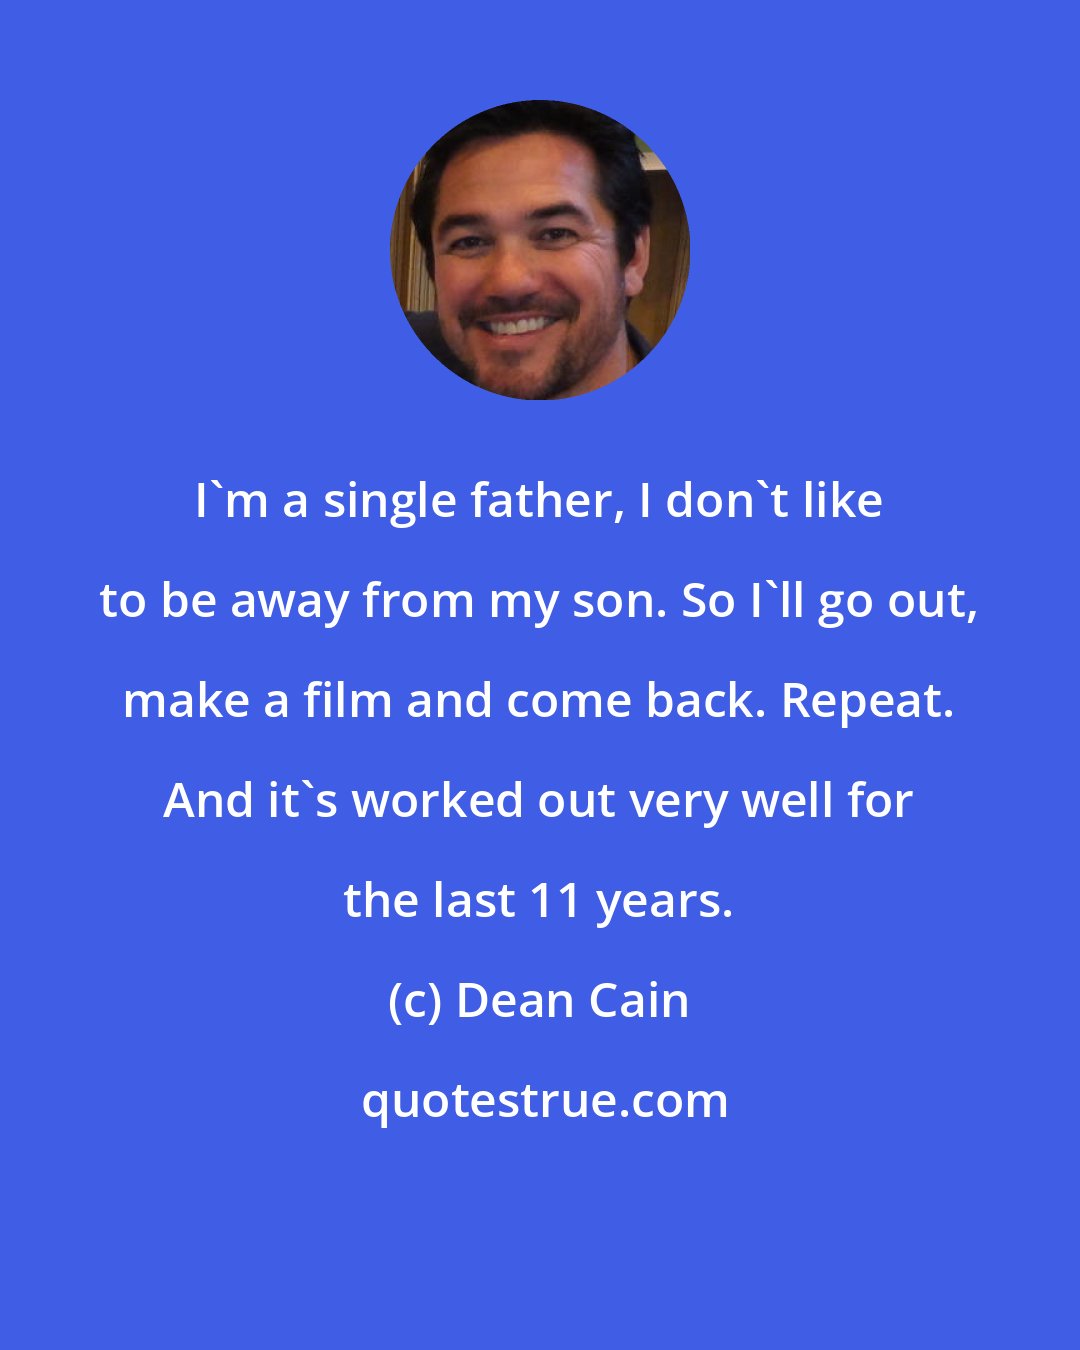 Dean Cain: I'm a single father, I don't like to be away from my son. So I'll go out, make a film and come back. Repeat. And it's worked out very well for the last 11 years.